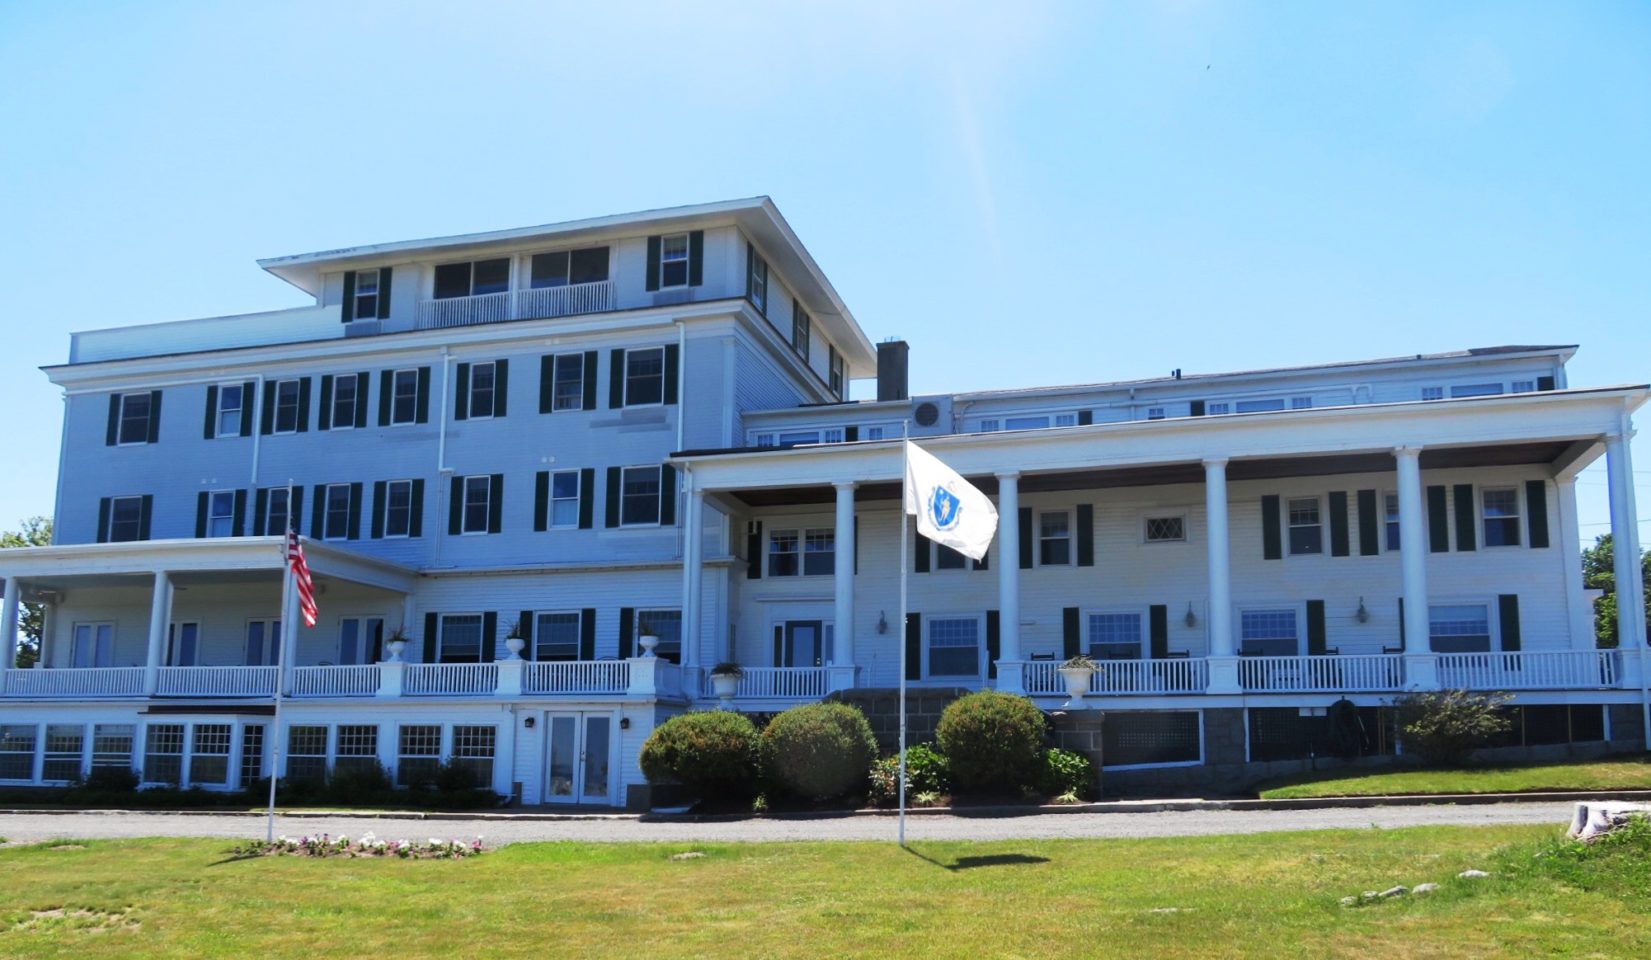 Emerson Inn by the Sea in Rockport Massachusetts